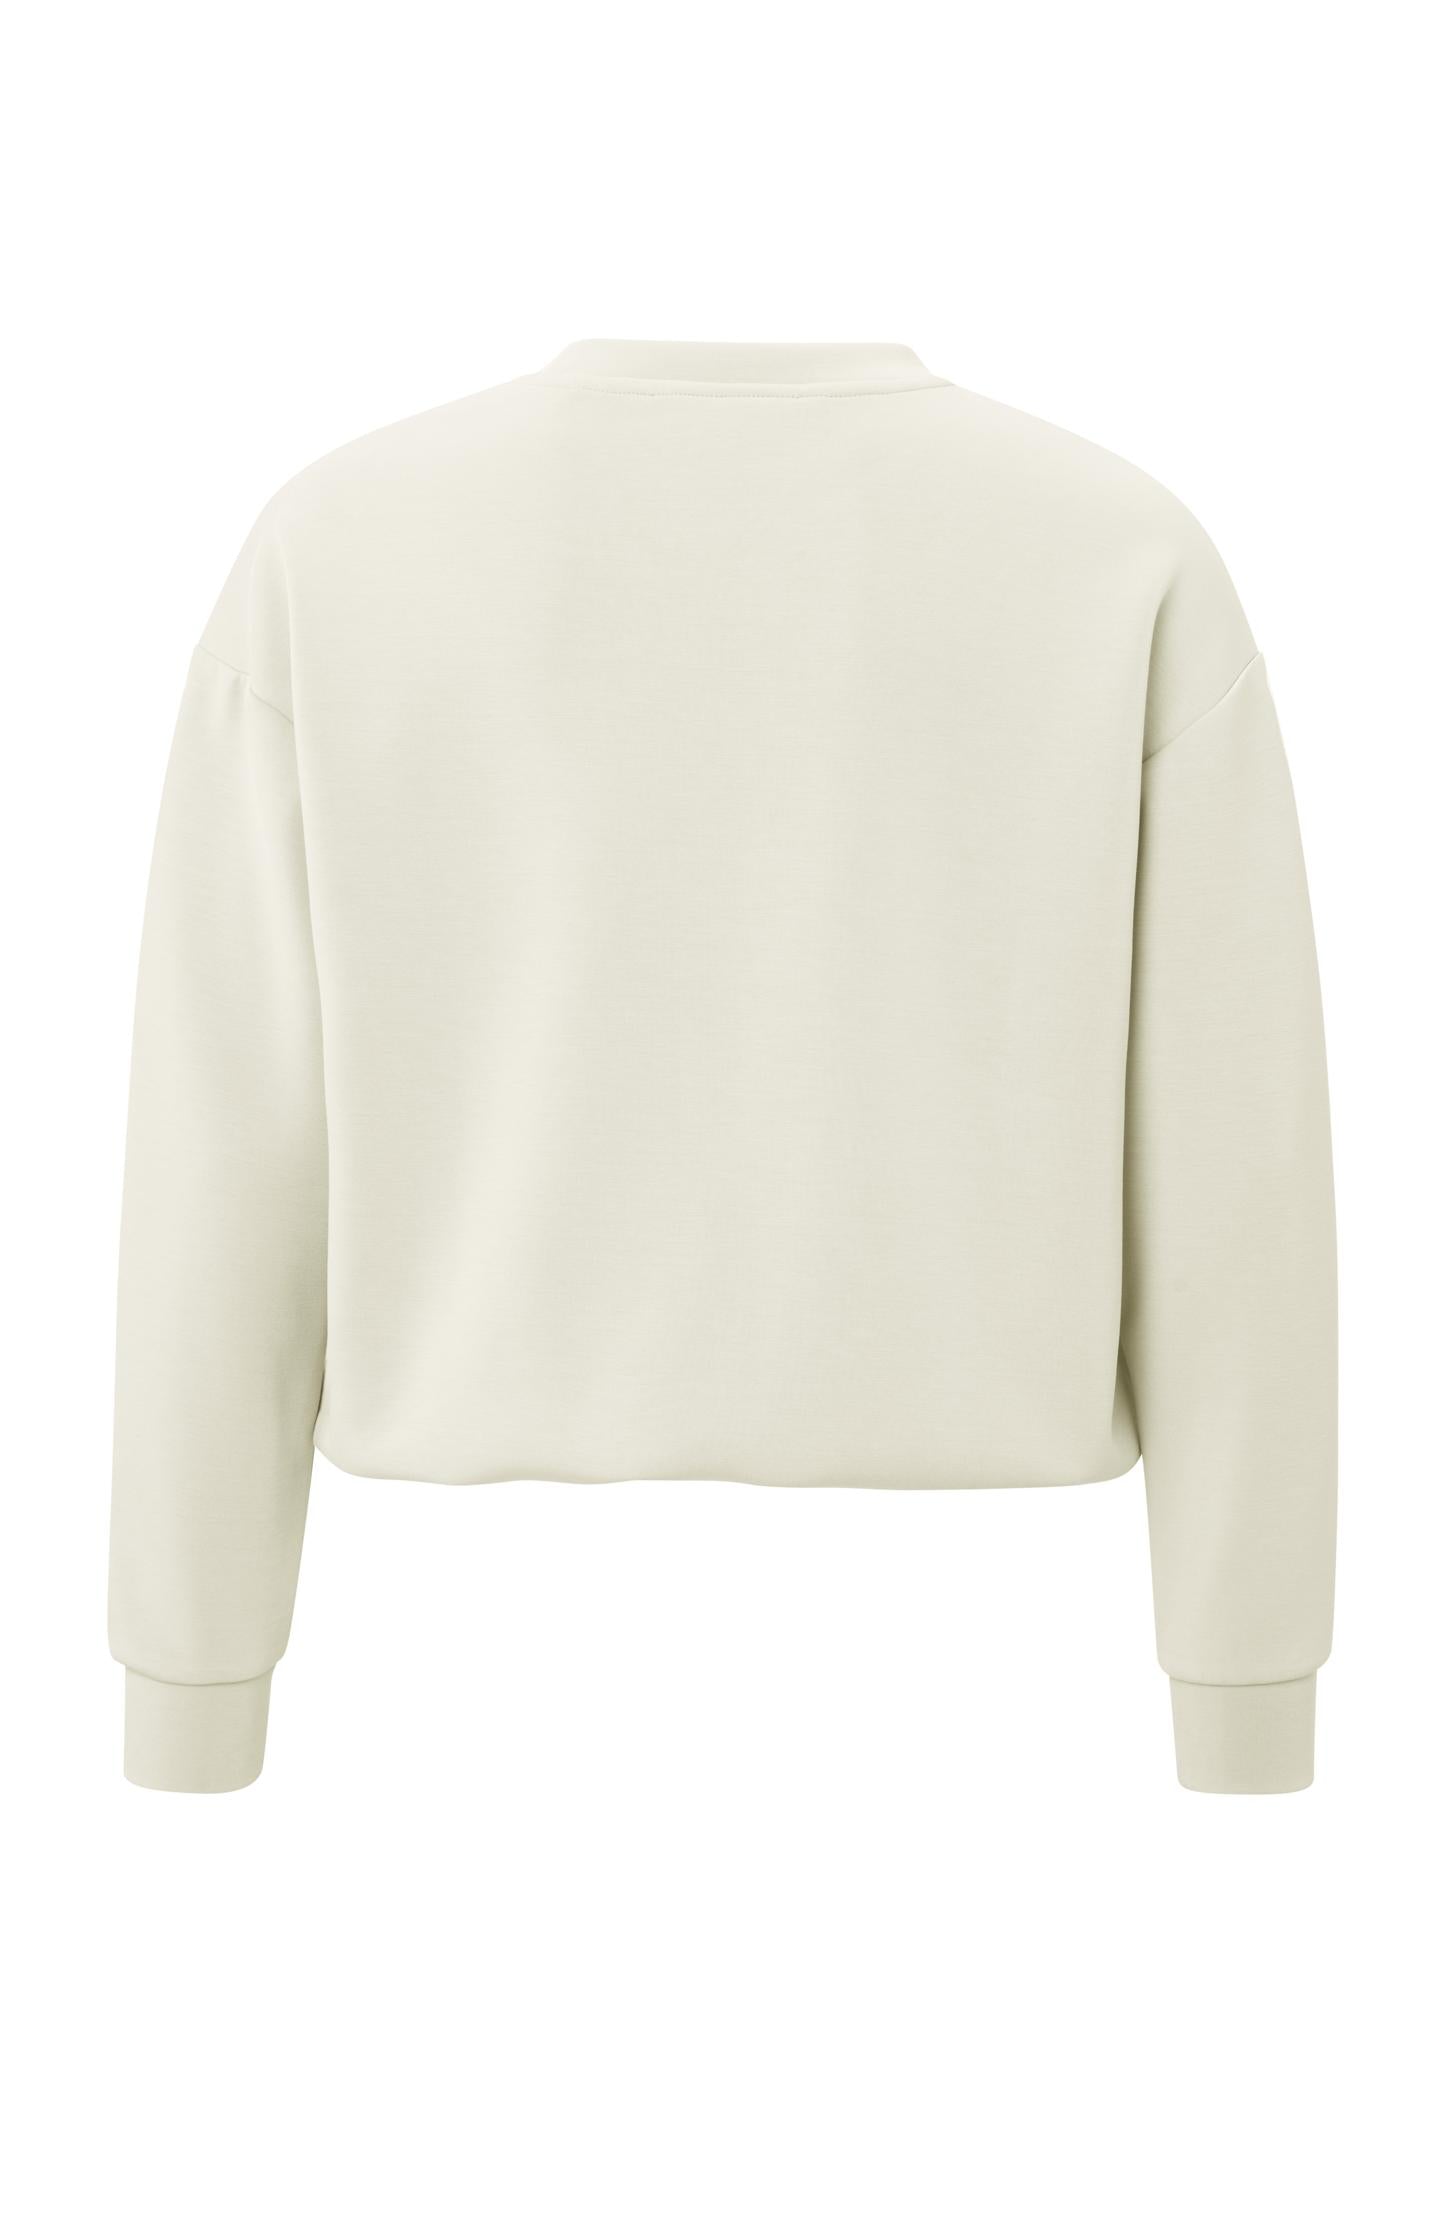 Long-sleeved scuba sweatshirt with round neck in wide fit